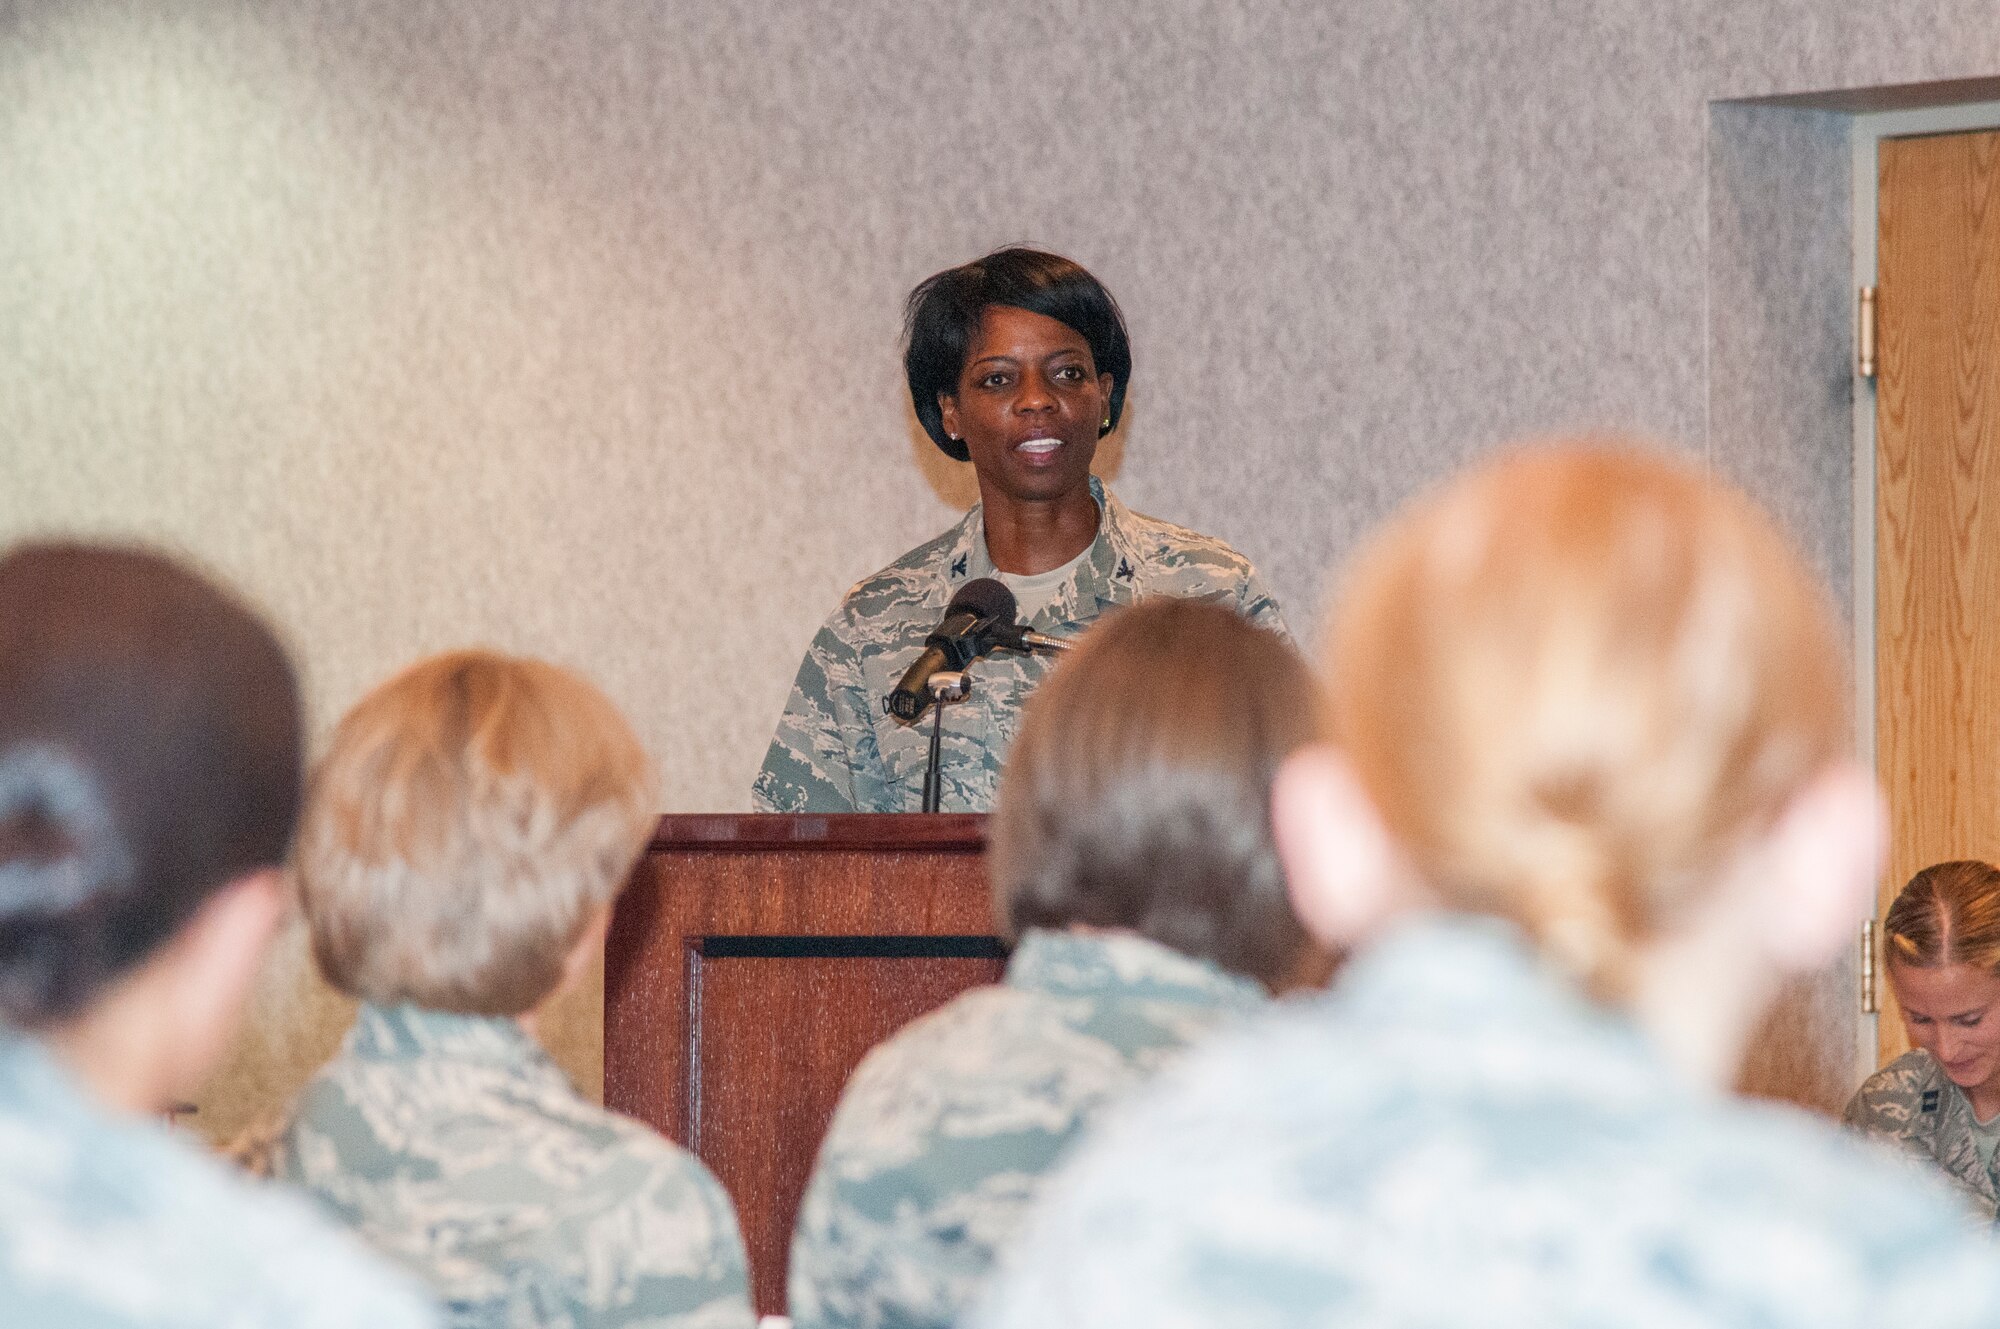 Col. Gail Crawford, Air Force Nuclear Weapons Center staff judge advocate, speaks to Airmen attending the 20th Air Force Women’s Leadership Symposium in the F.E. Warren Air Force Base, Wyo., Trail’s End Event Center Sept. 16, 2015. Crawford was among a group of female leaders who mentored female Airmen during the symposium to help them improve their leadership skills. (U.S. Air Force photo by Senior Airman Jason Wiese)